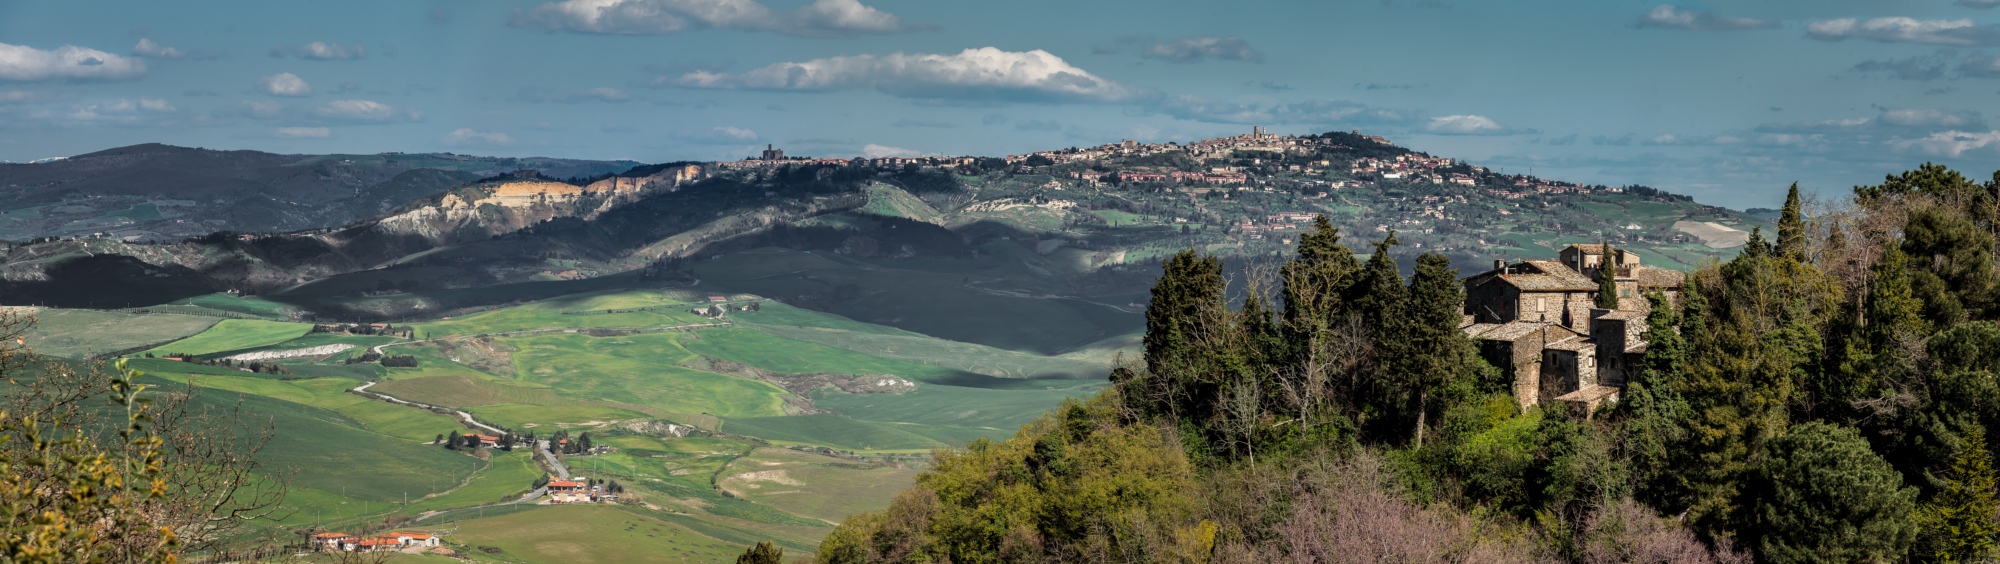 Volterra (in the distance) and its countryside